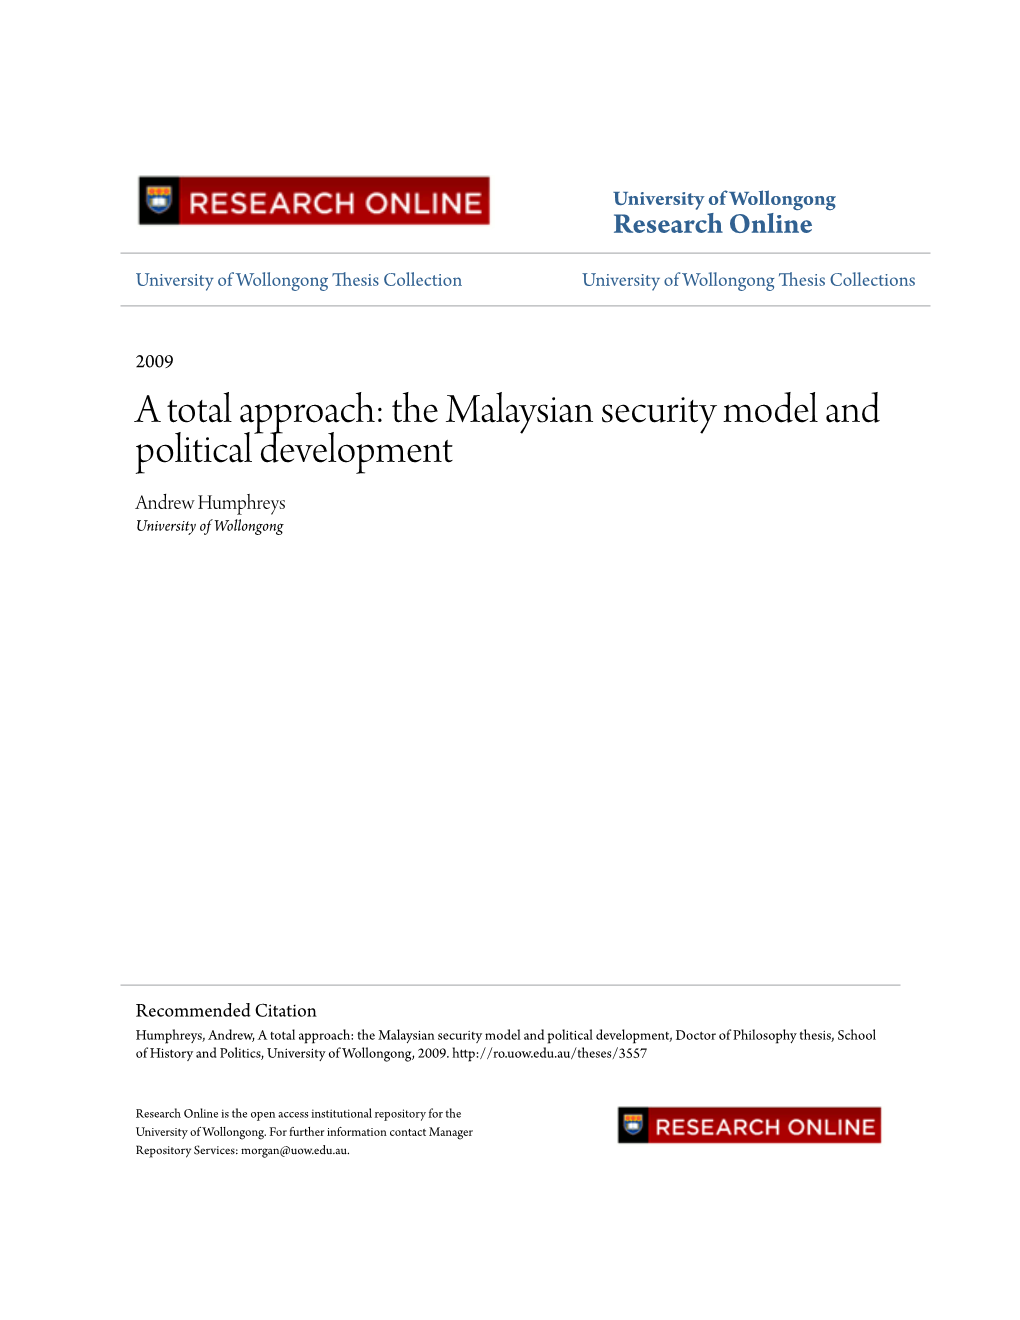 A Total Approach: the Malaysian Security Model and Political Development Andrew Humphreys University of Wollongong